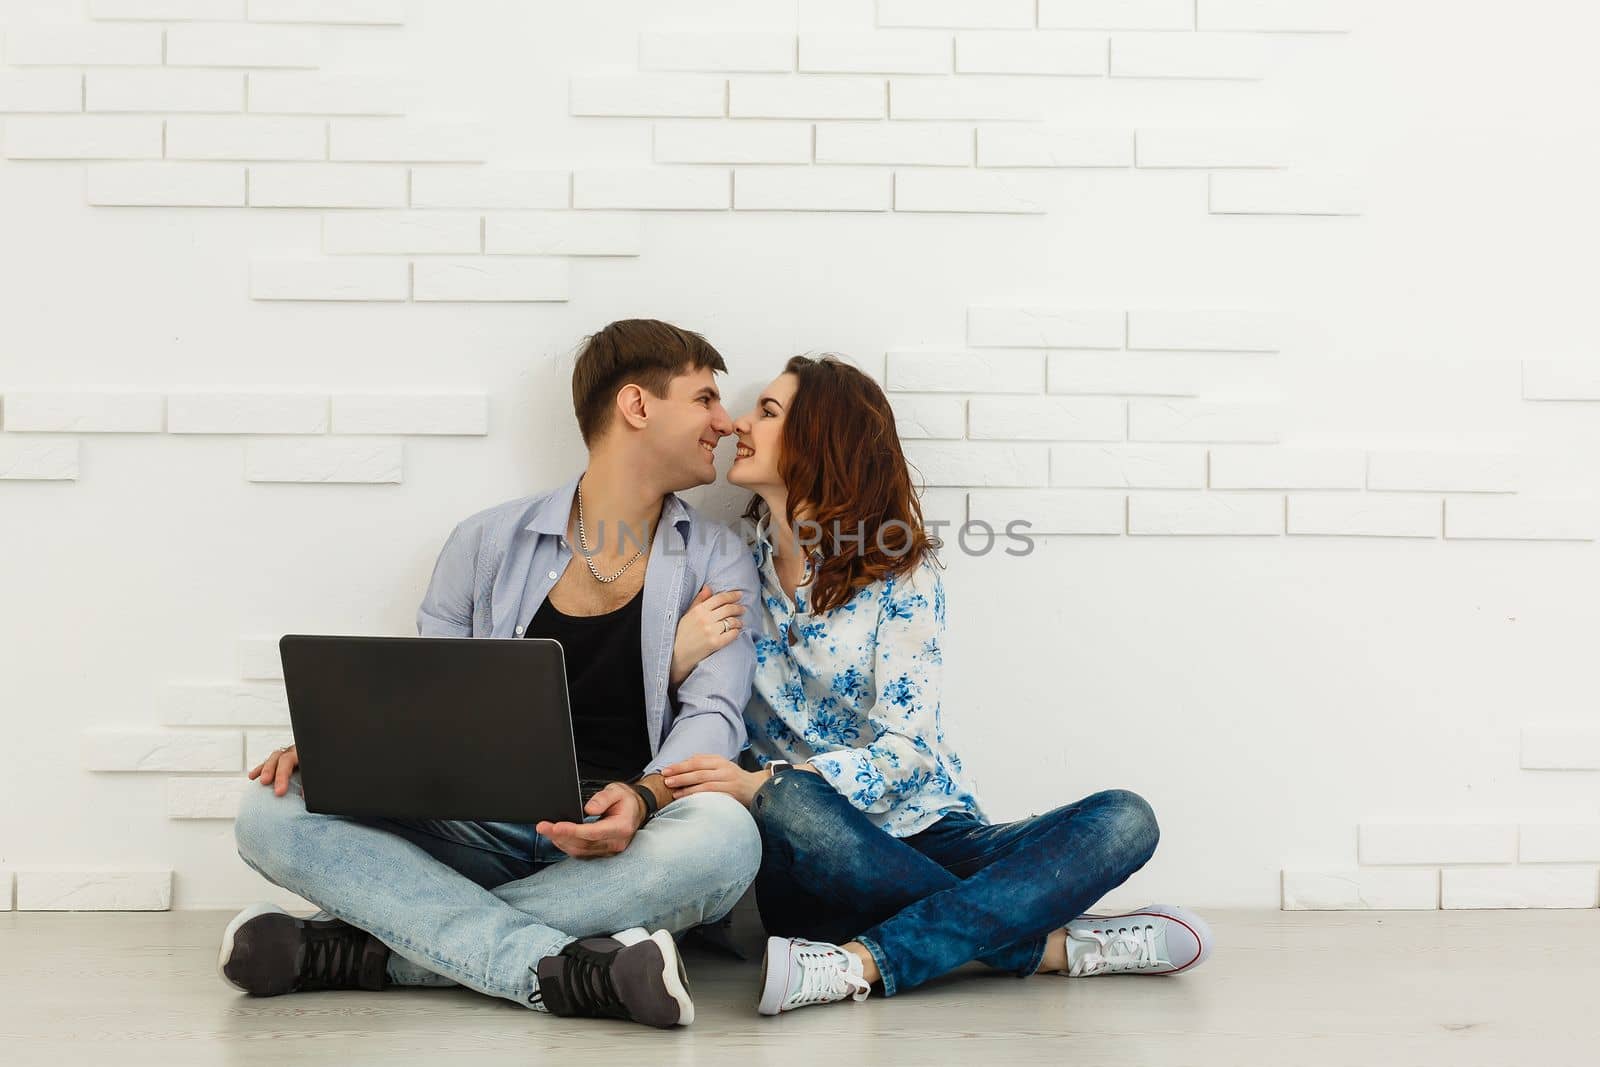 Nice portrait of couple with laptop.